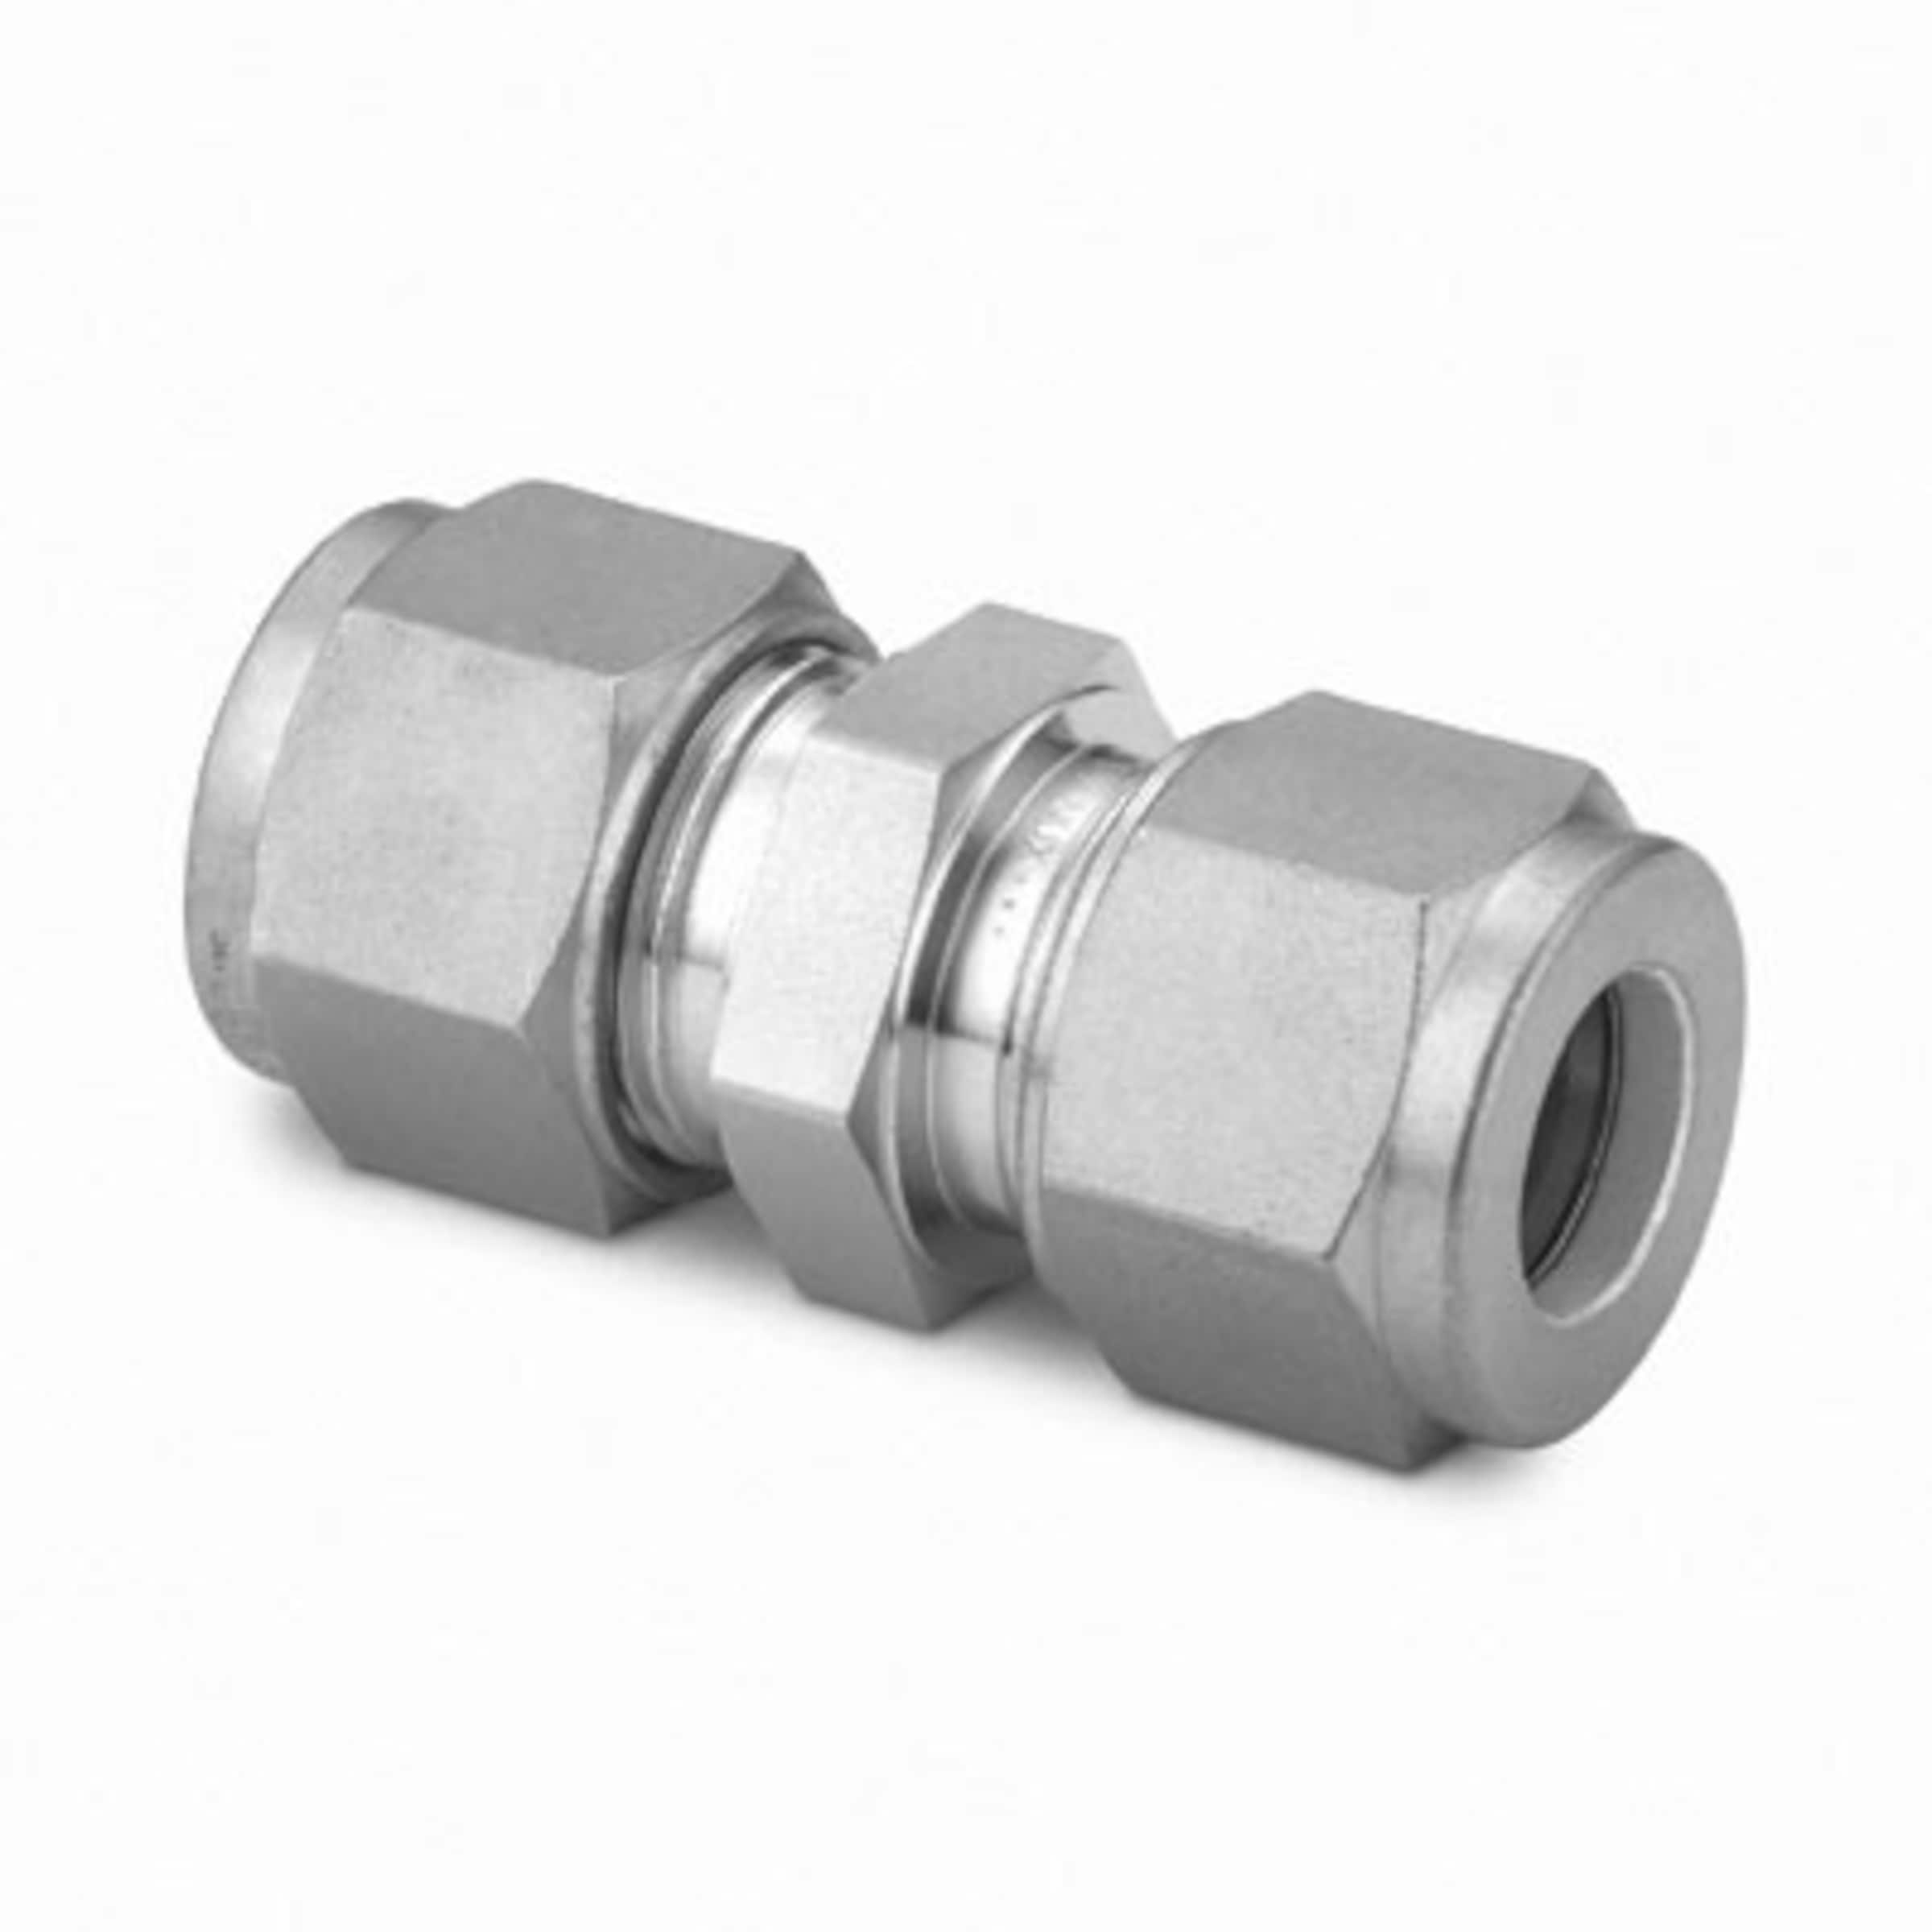 Compression Fitting, 1/8 x 3/16 Tube, Brass - PST Pool Supplies